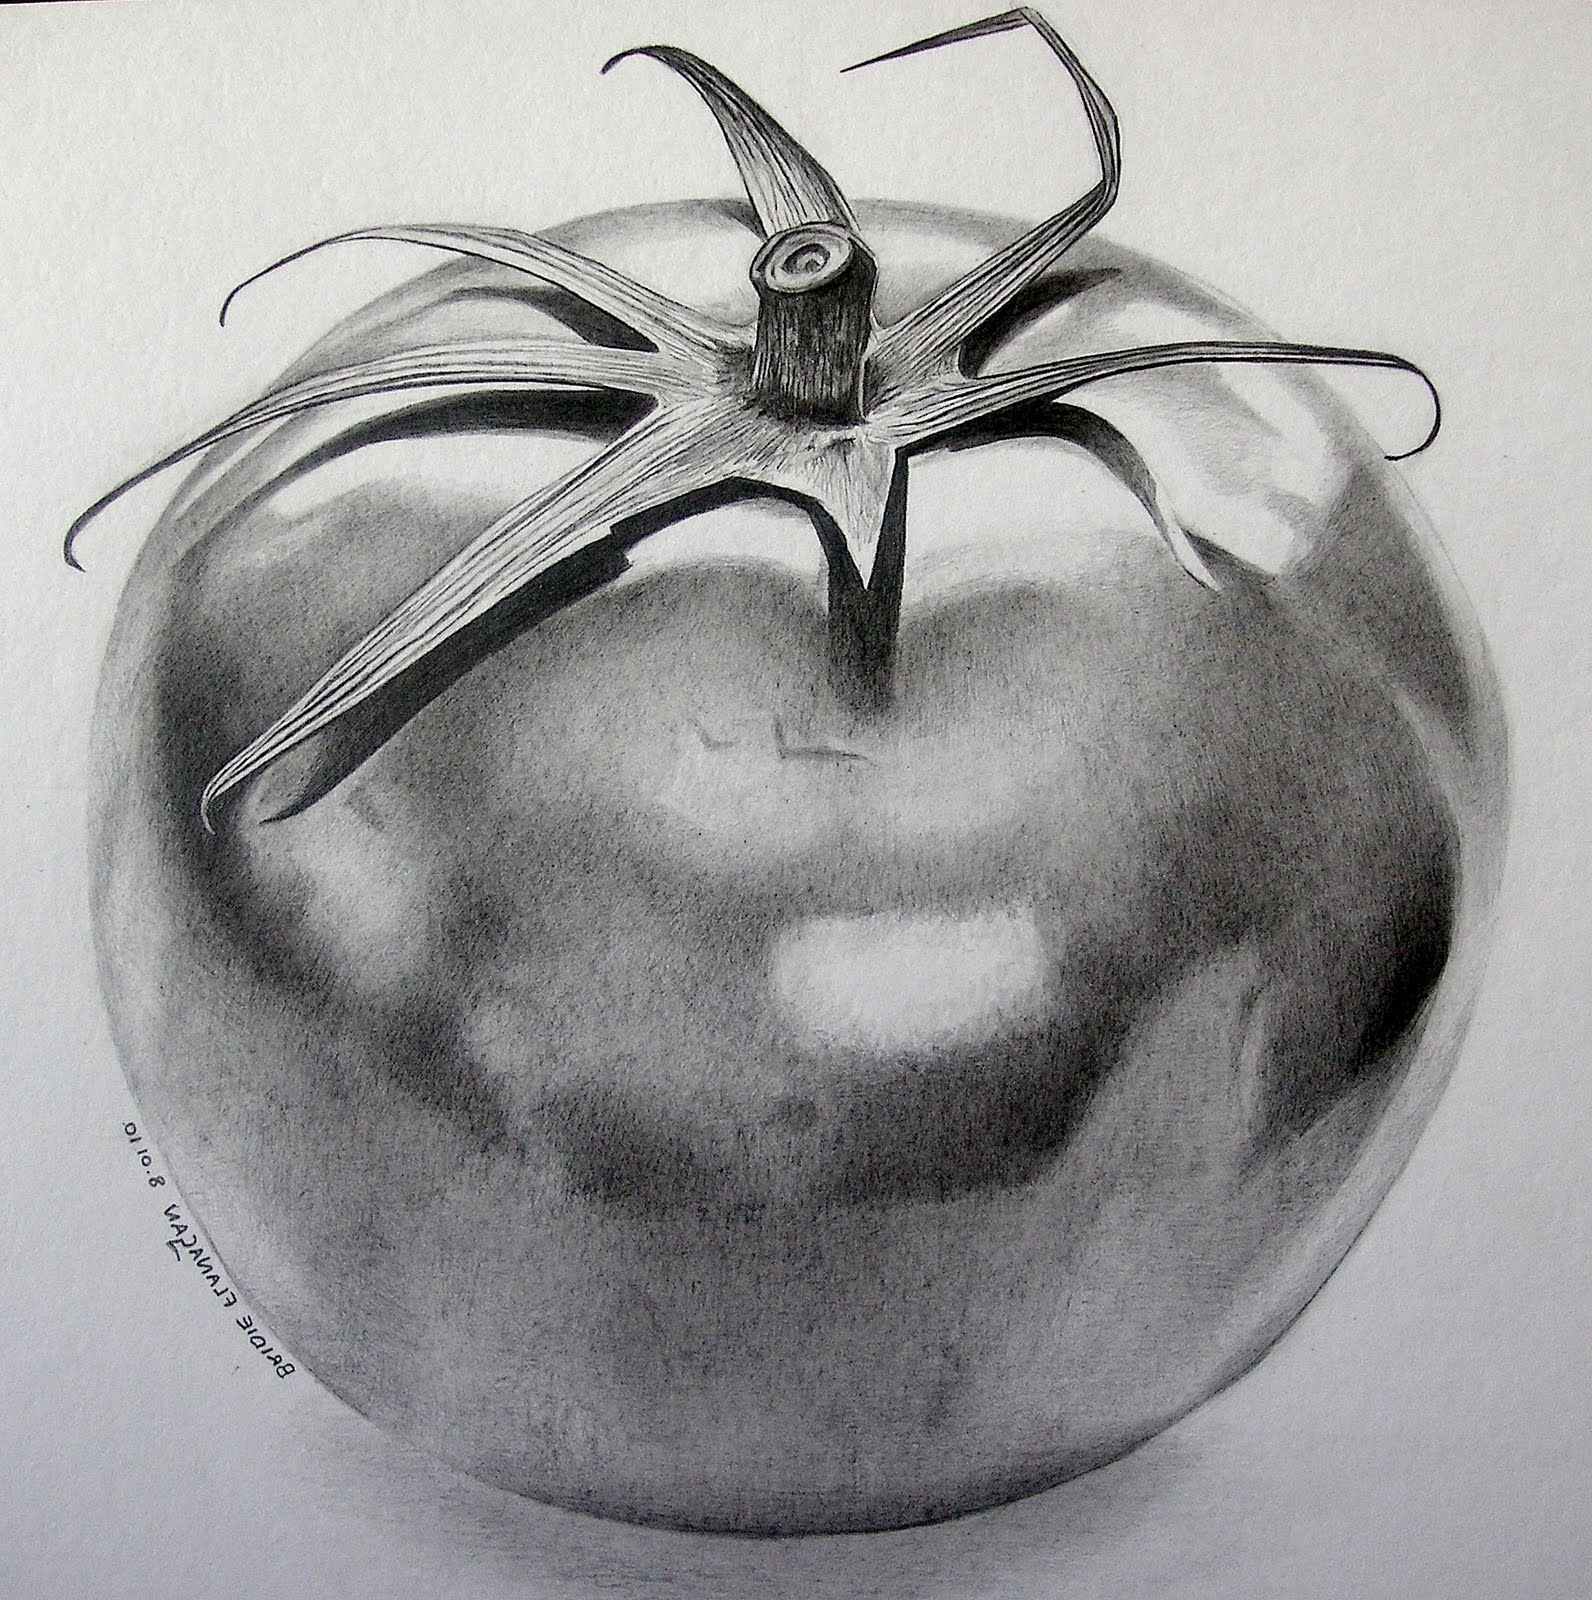 Drawing Fruit In Pencil Pencil Sketches Of Fruits And Vegetables - Fruit .....